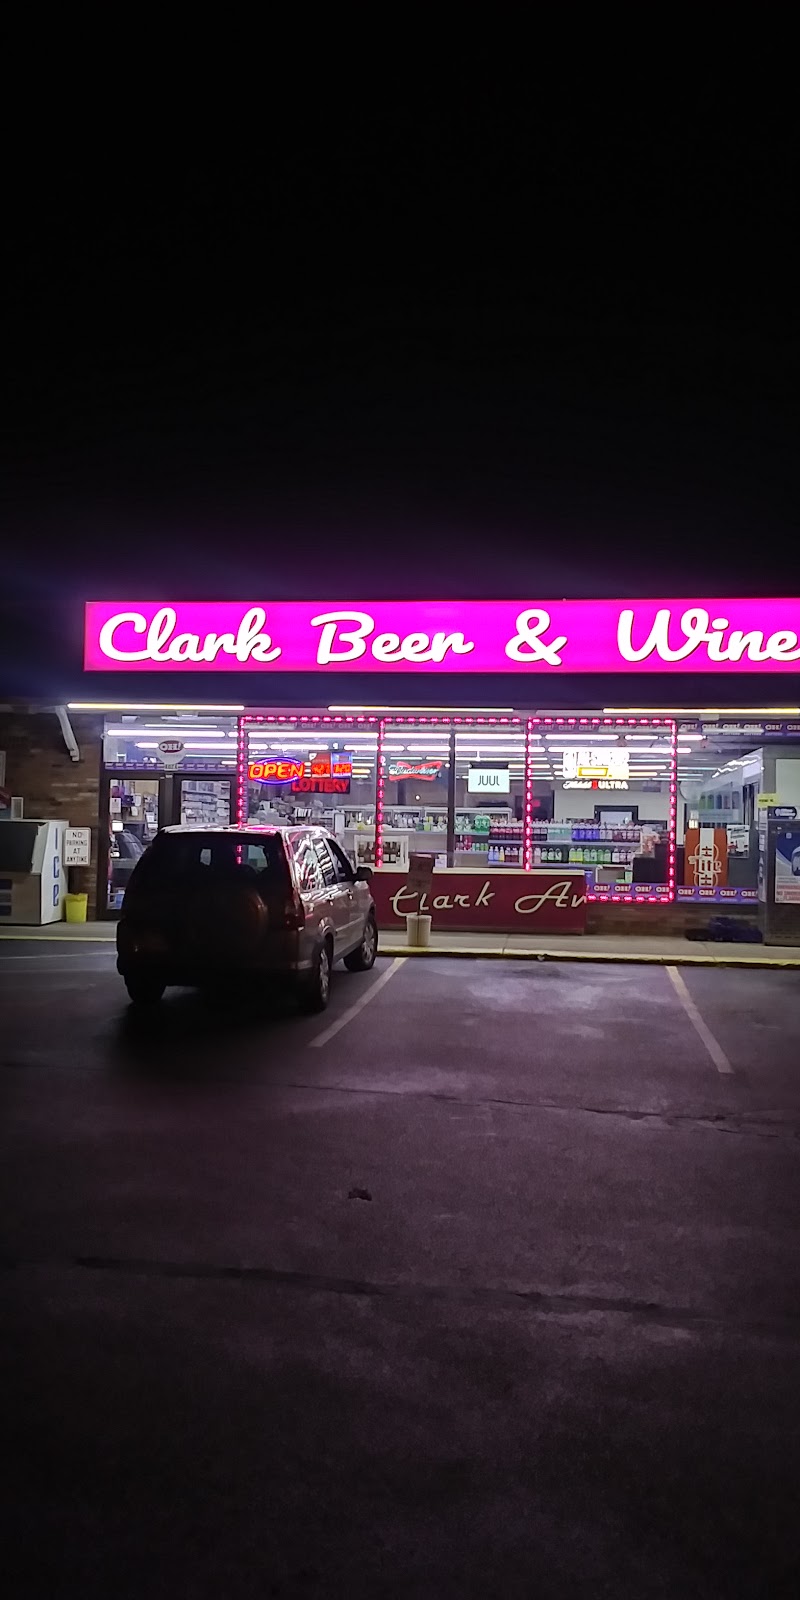 Clarke Avenue Groceries | 4074 Clark Ave, Willoughby, OH 44094, USA | Phone: (440) 946-5527